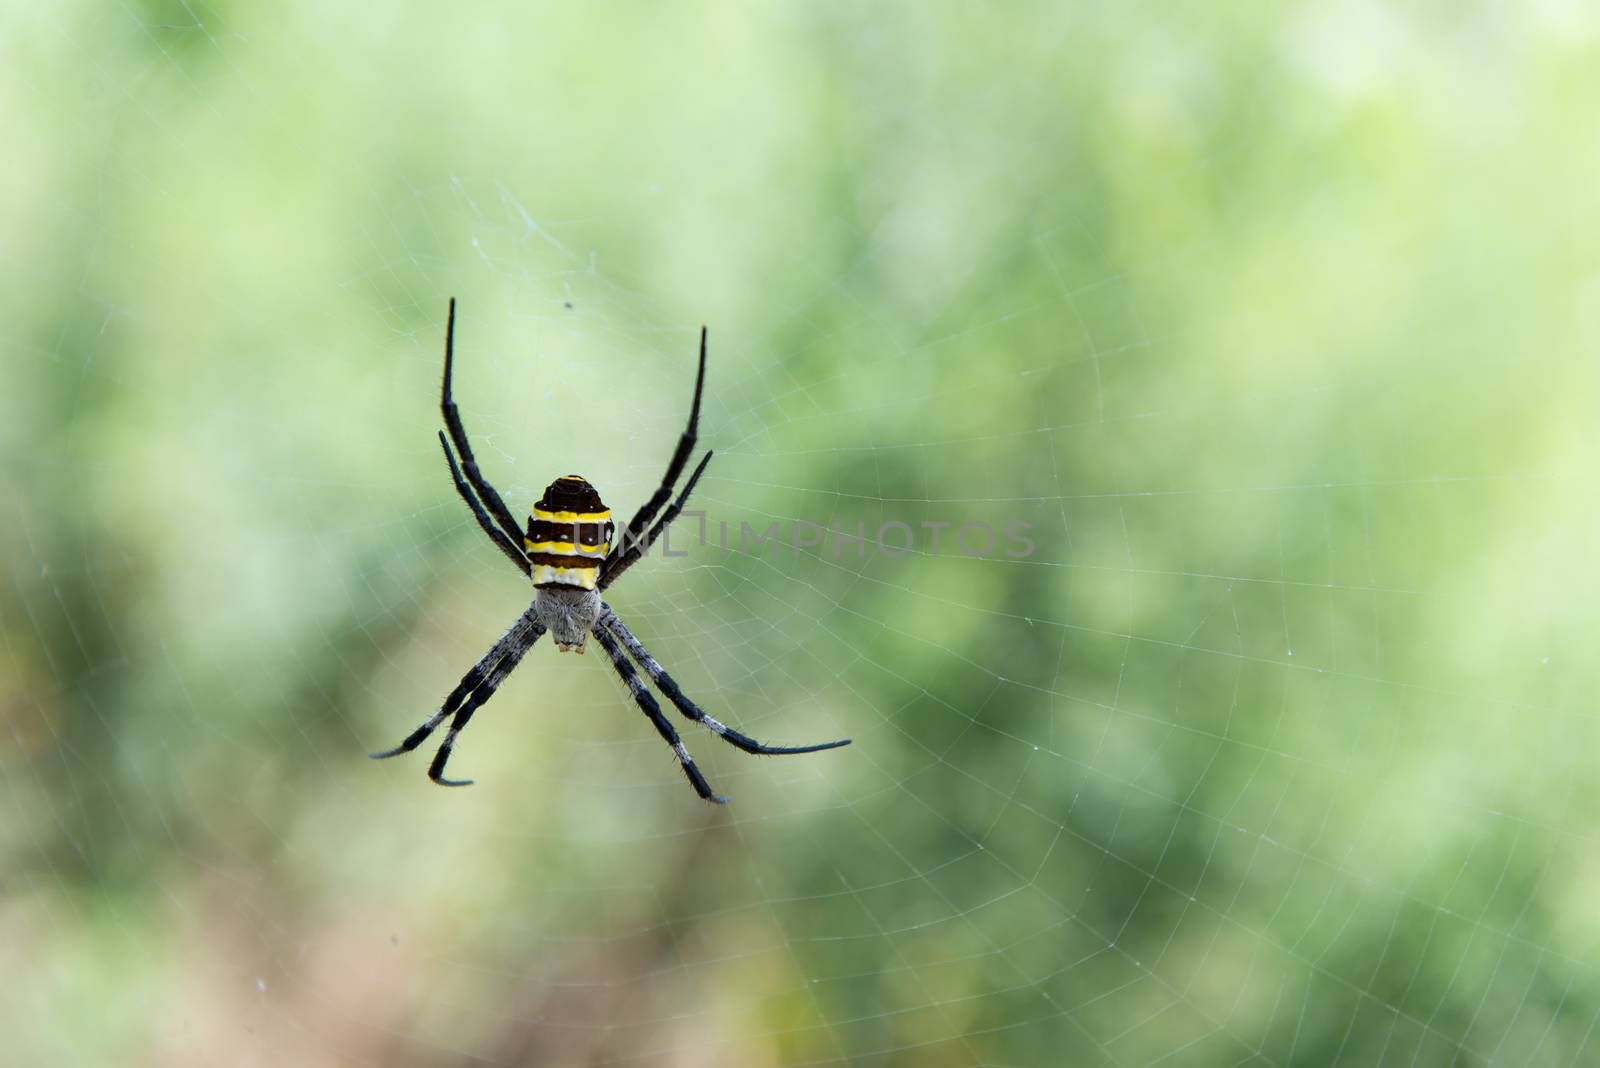 Argiope sp. spider from South Korea by Arrxxx